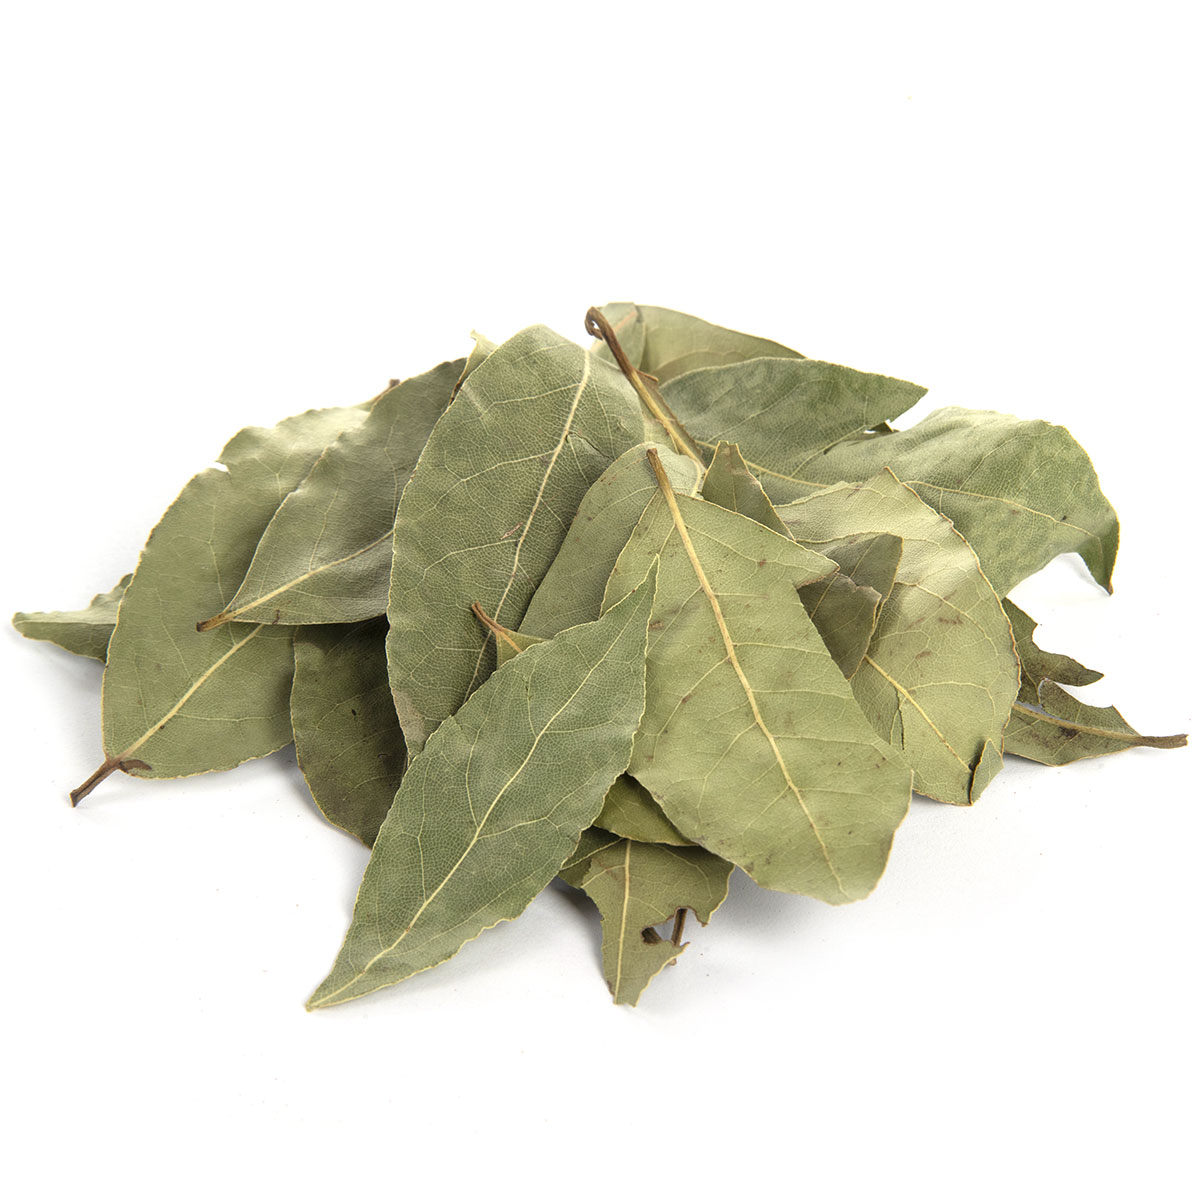 bay leaves to represent how world of spice bespoke herb and spice suppliers can help business save money.